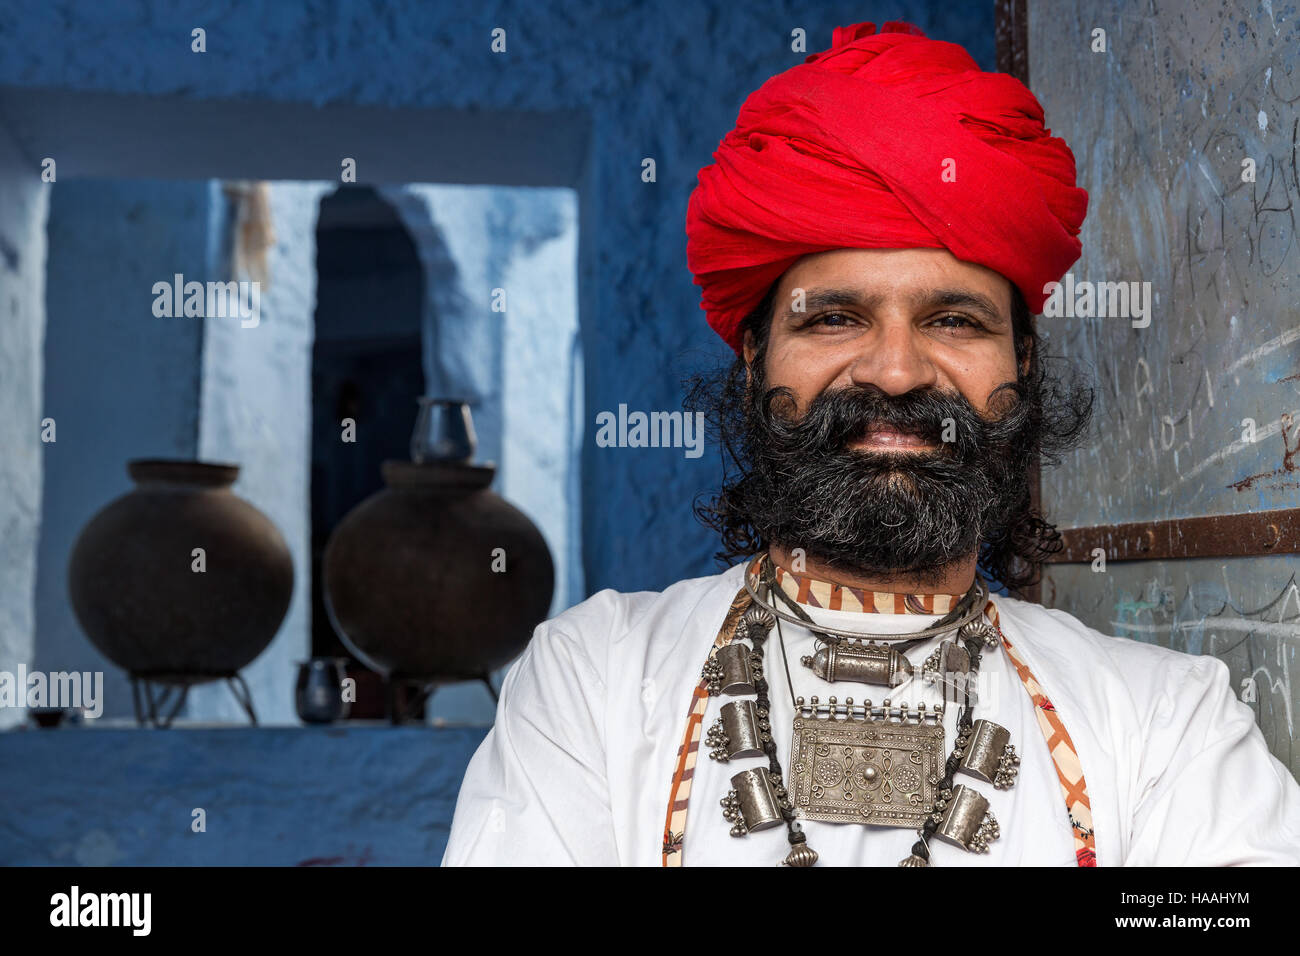 Man from Rajasthan dressed in traditional clothes, Jodhpur, Rajasthan, India Stock Photo